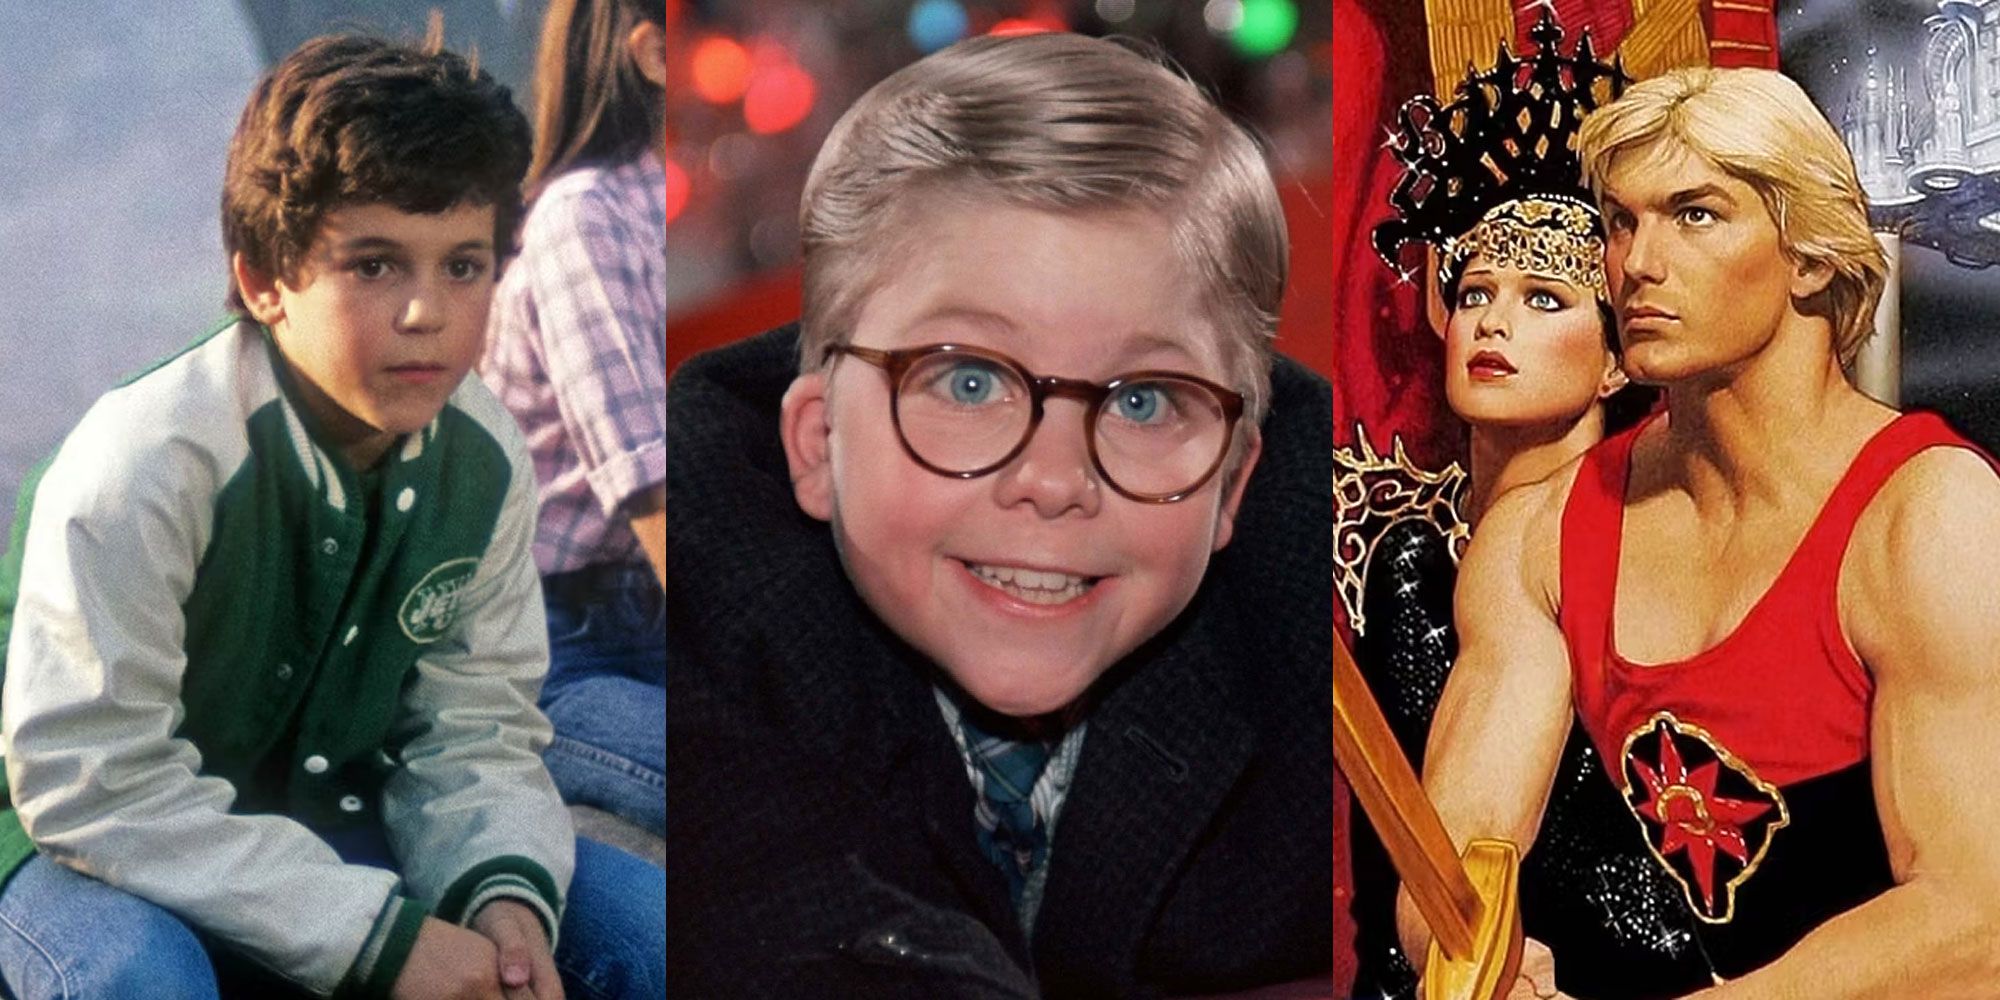 Split image with child actors from the 80s and Flash Gordon